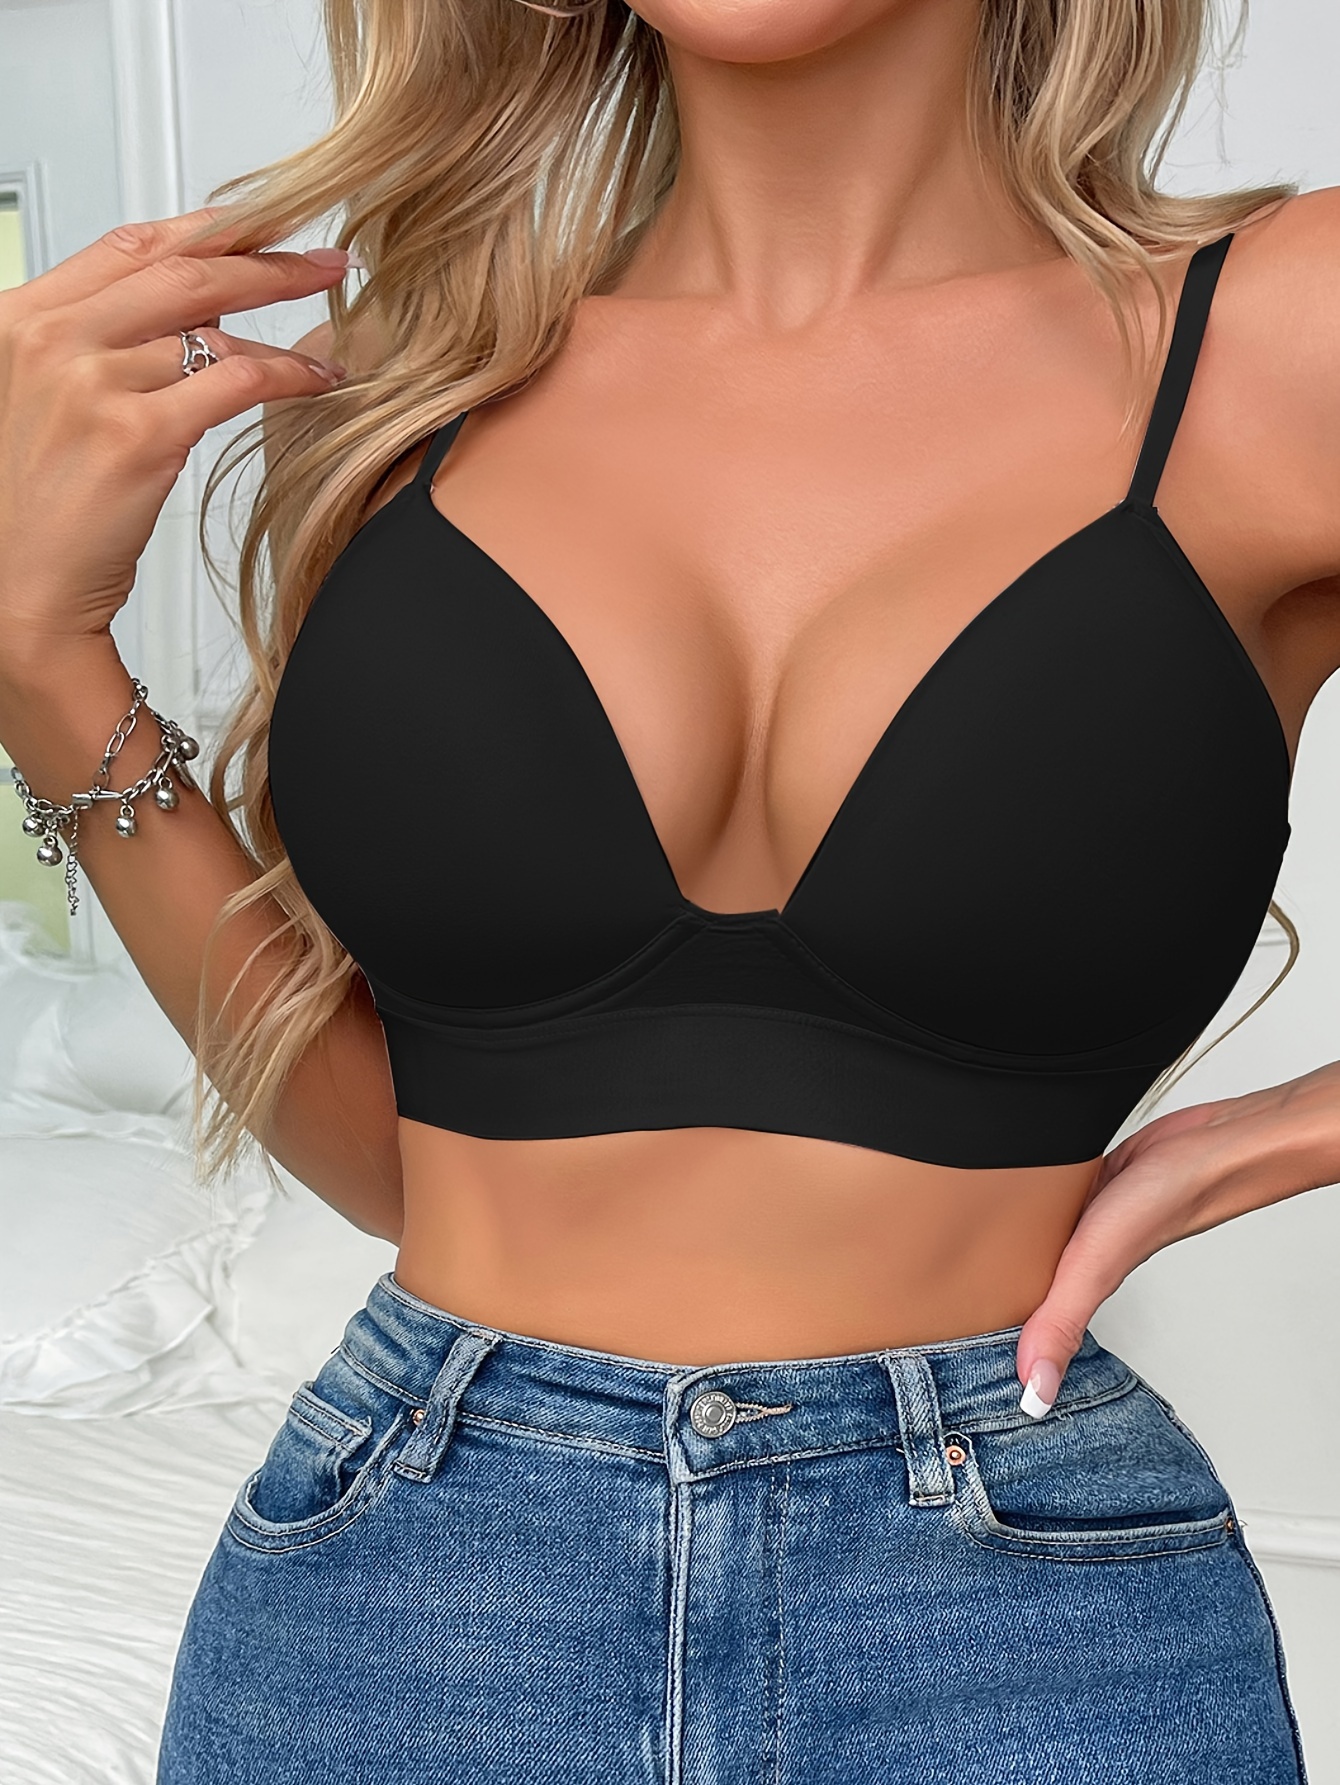 An everyday classic pushup bra at Le Boudoir! Comfortable black push-up bra  that you'll want to wear everyday. Shop in-store 📍256 Water …